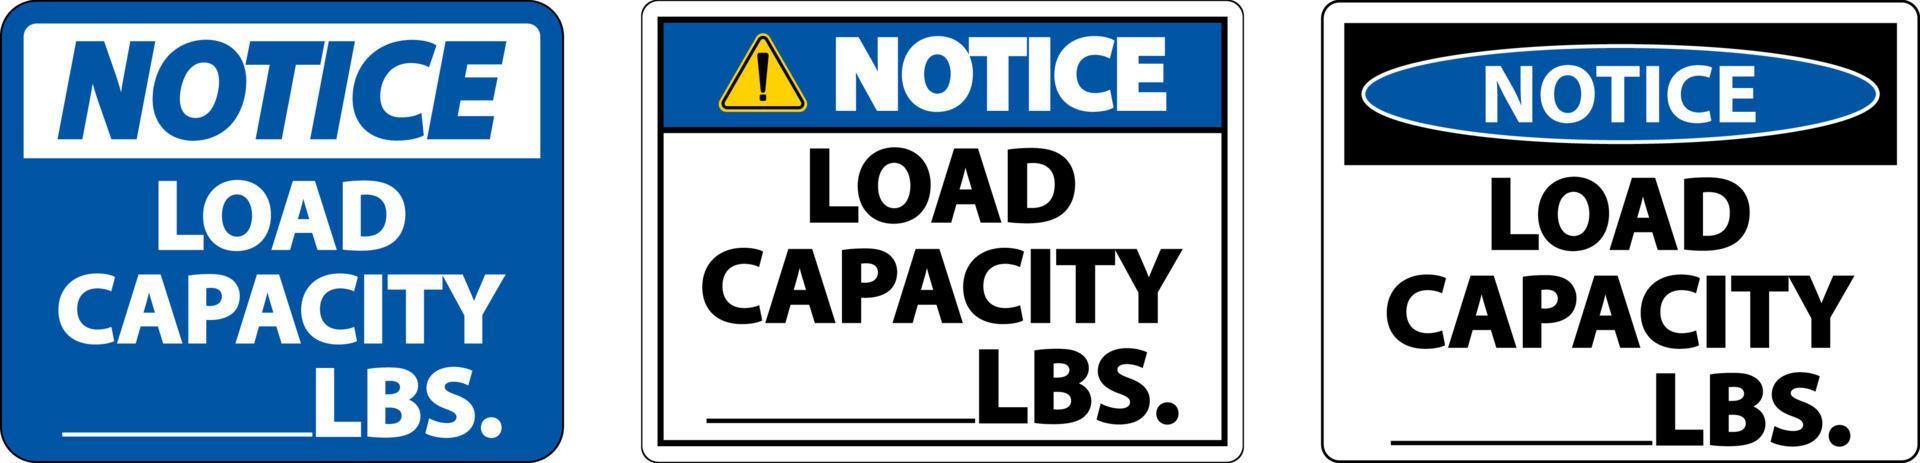 Notice Load Capacity Label Sign On White Background vector